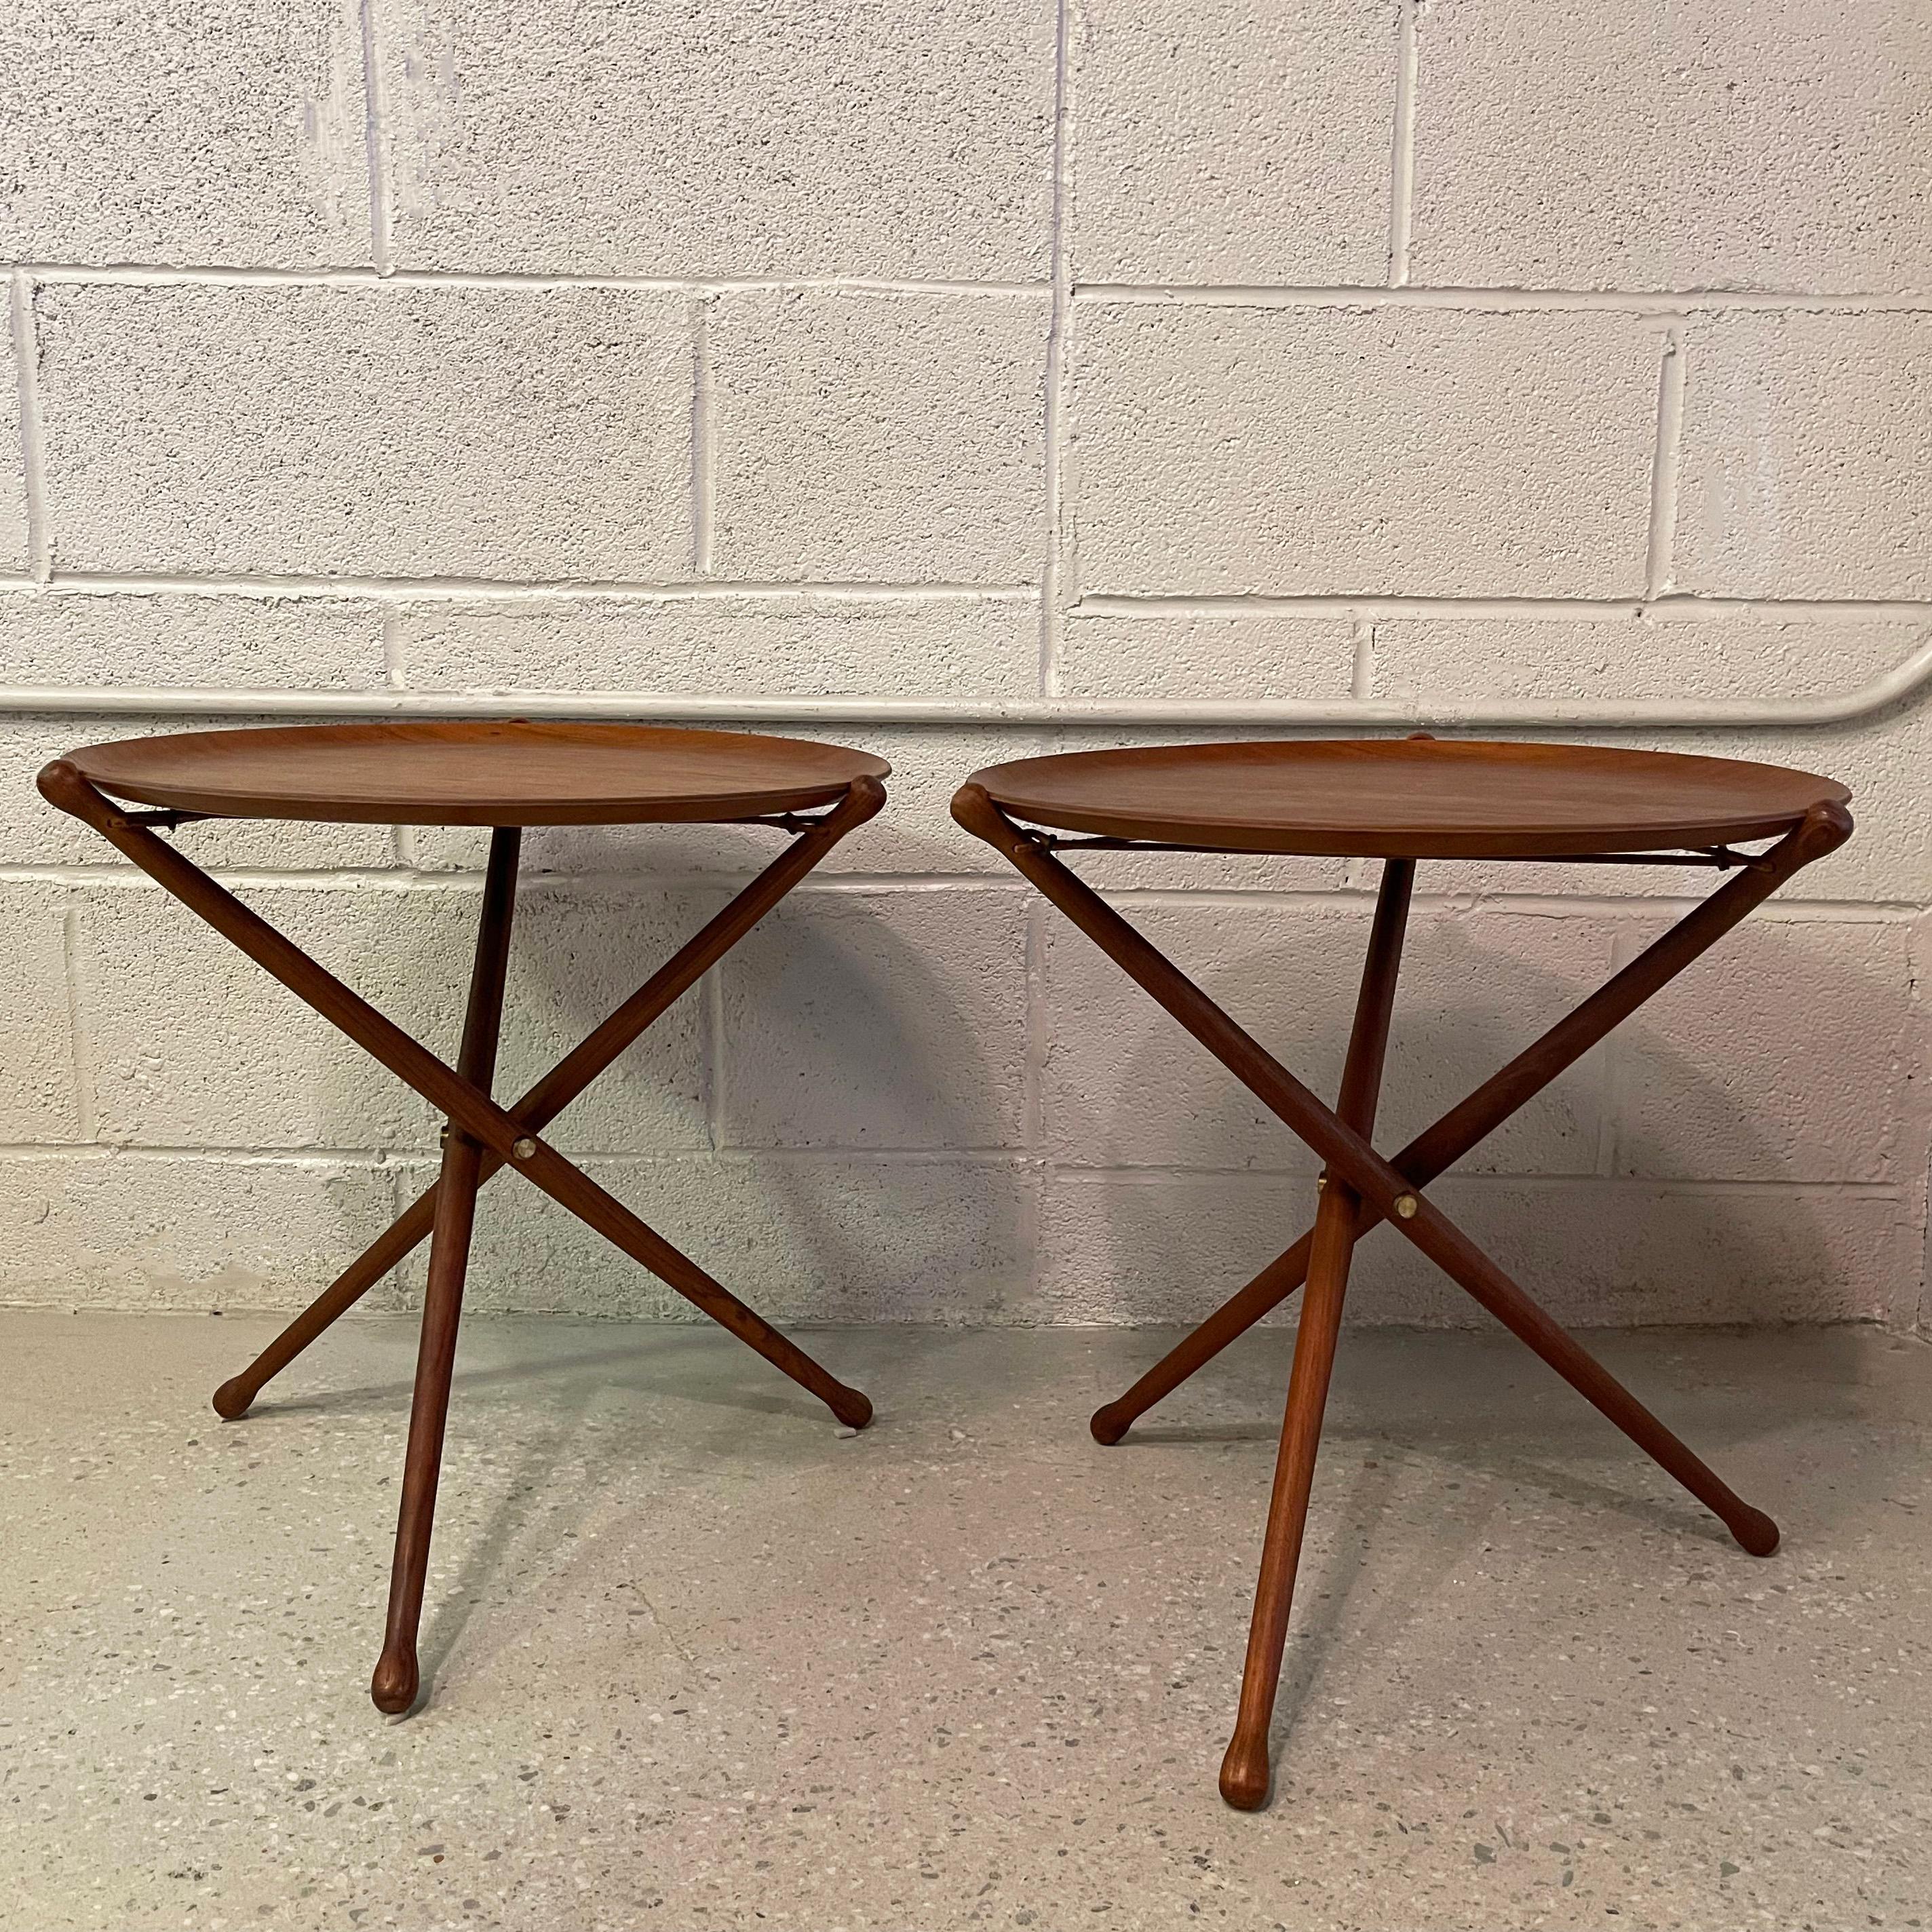 Leather Pair Of Teak Folding Tray Tables By Nils Trautner For Ary Nybro, Sweden For Sale